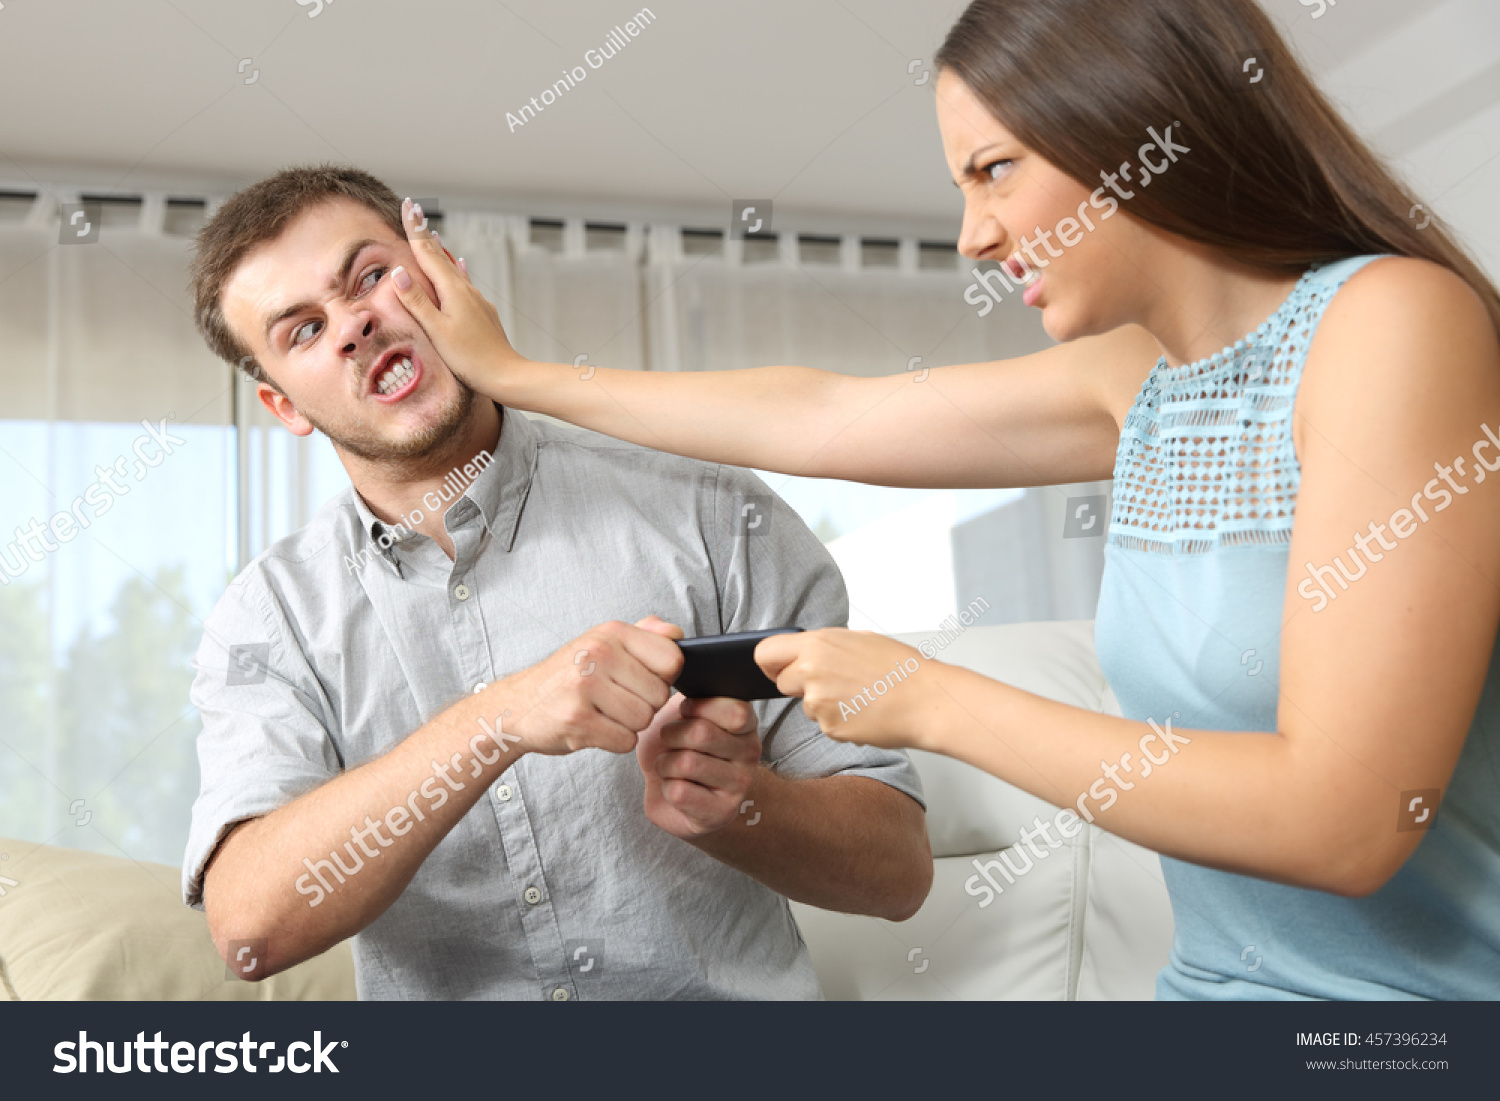 Couple or friends fighting for a mobile phone sitting on a couch at home #457396234